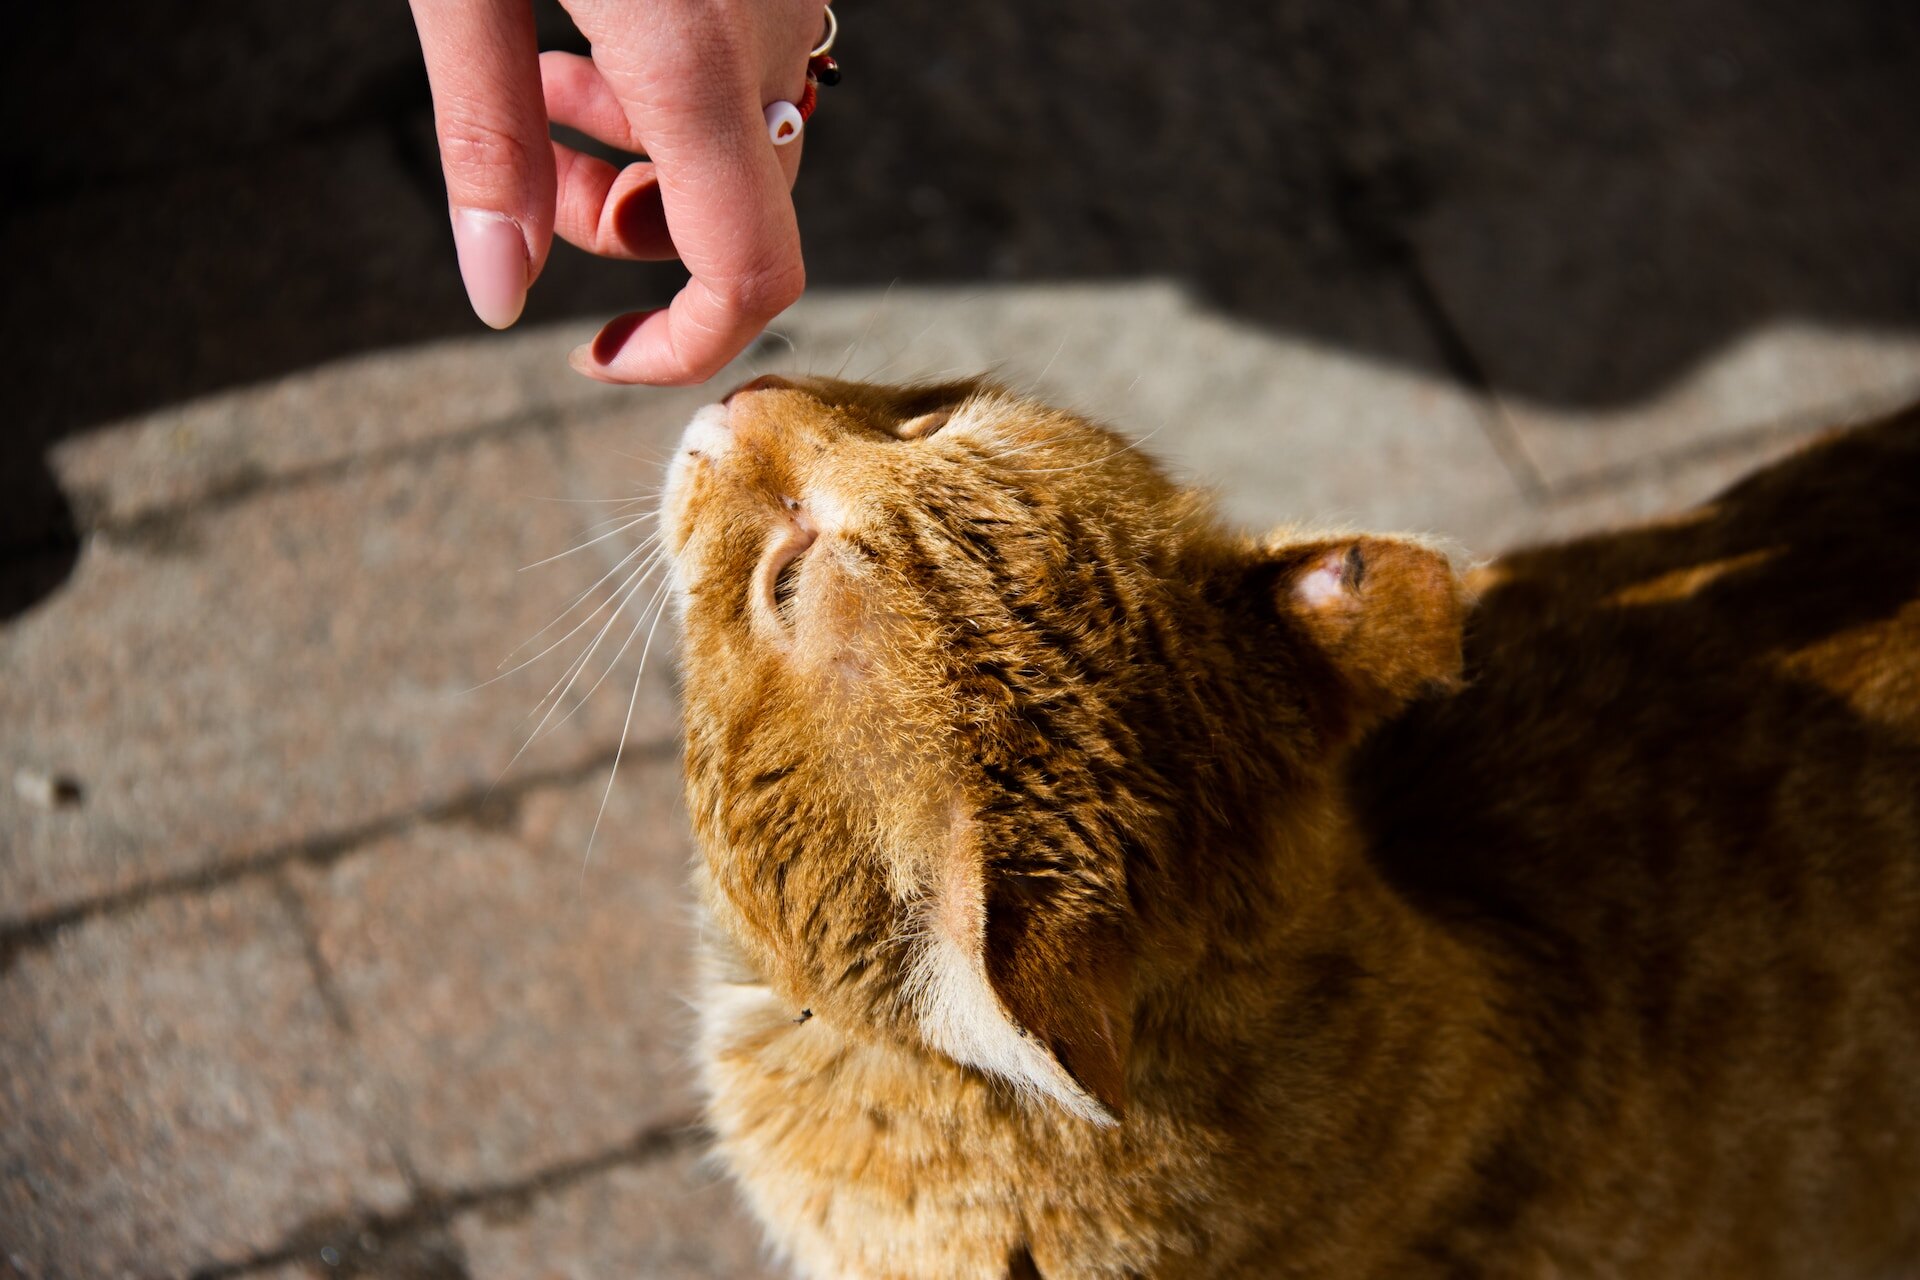 A cat sniffing a woman's hand